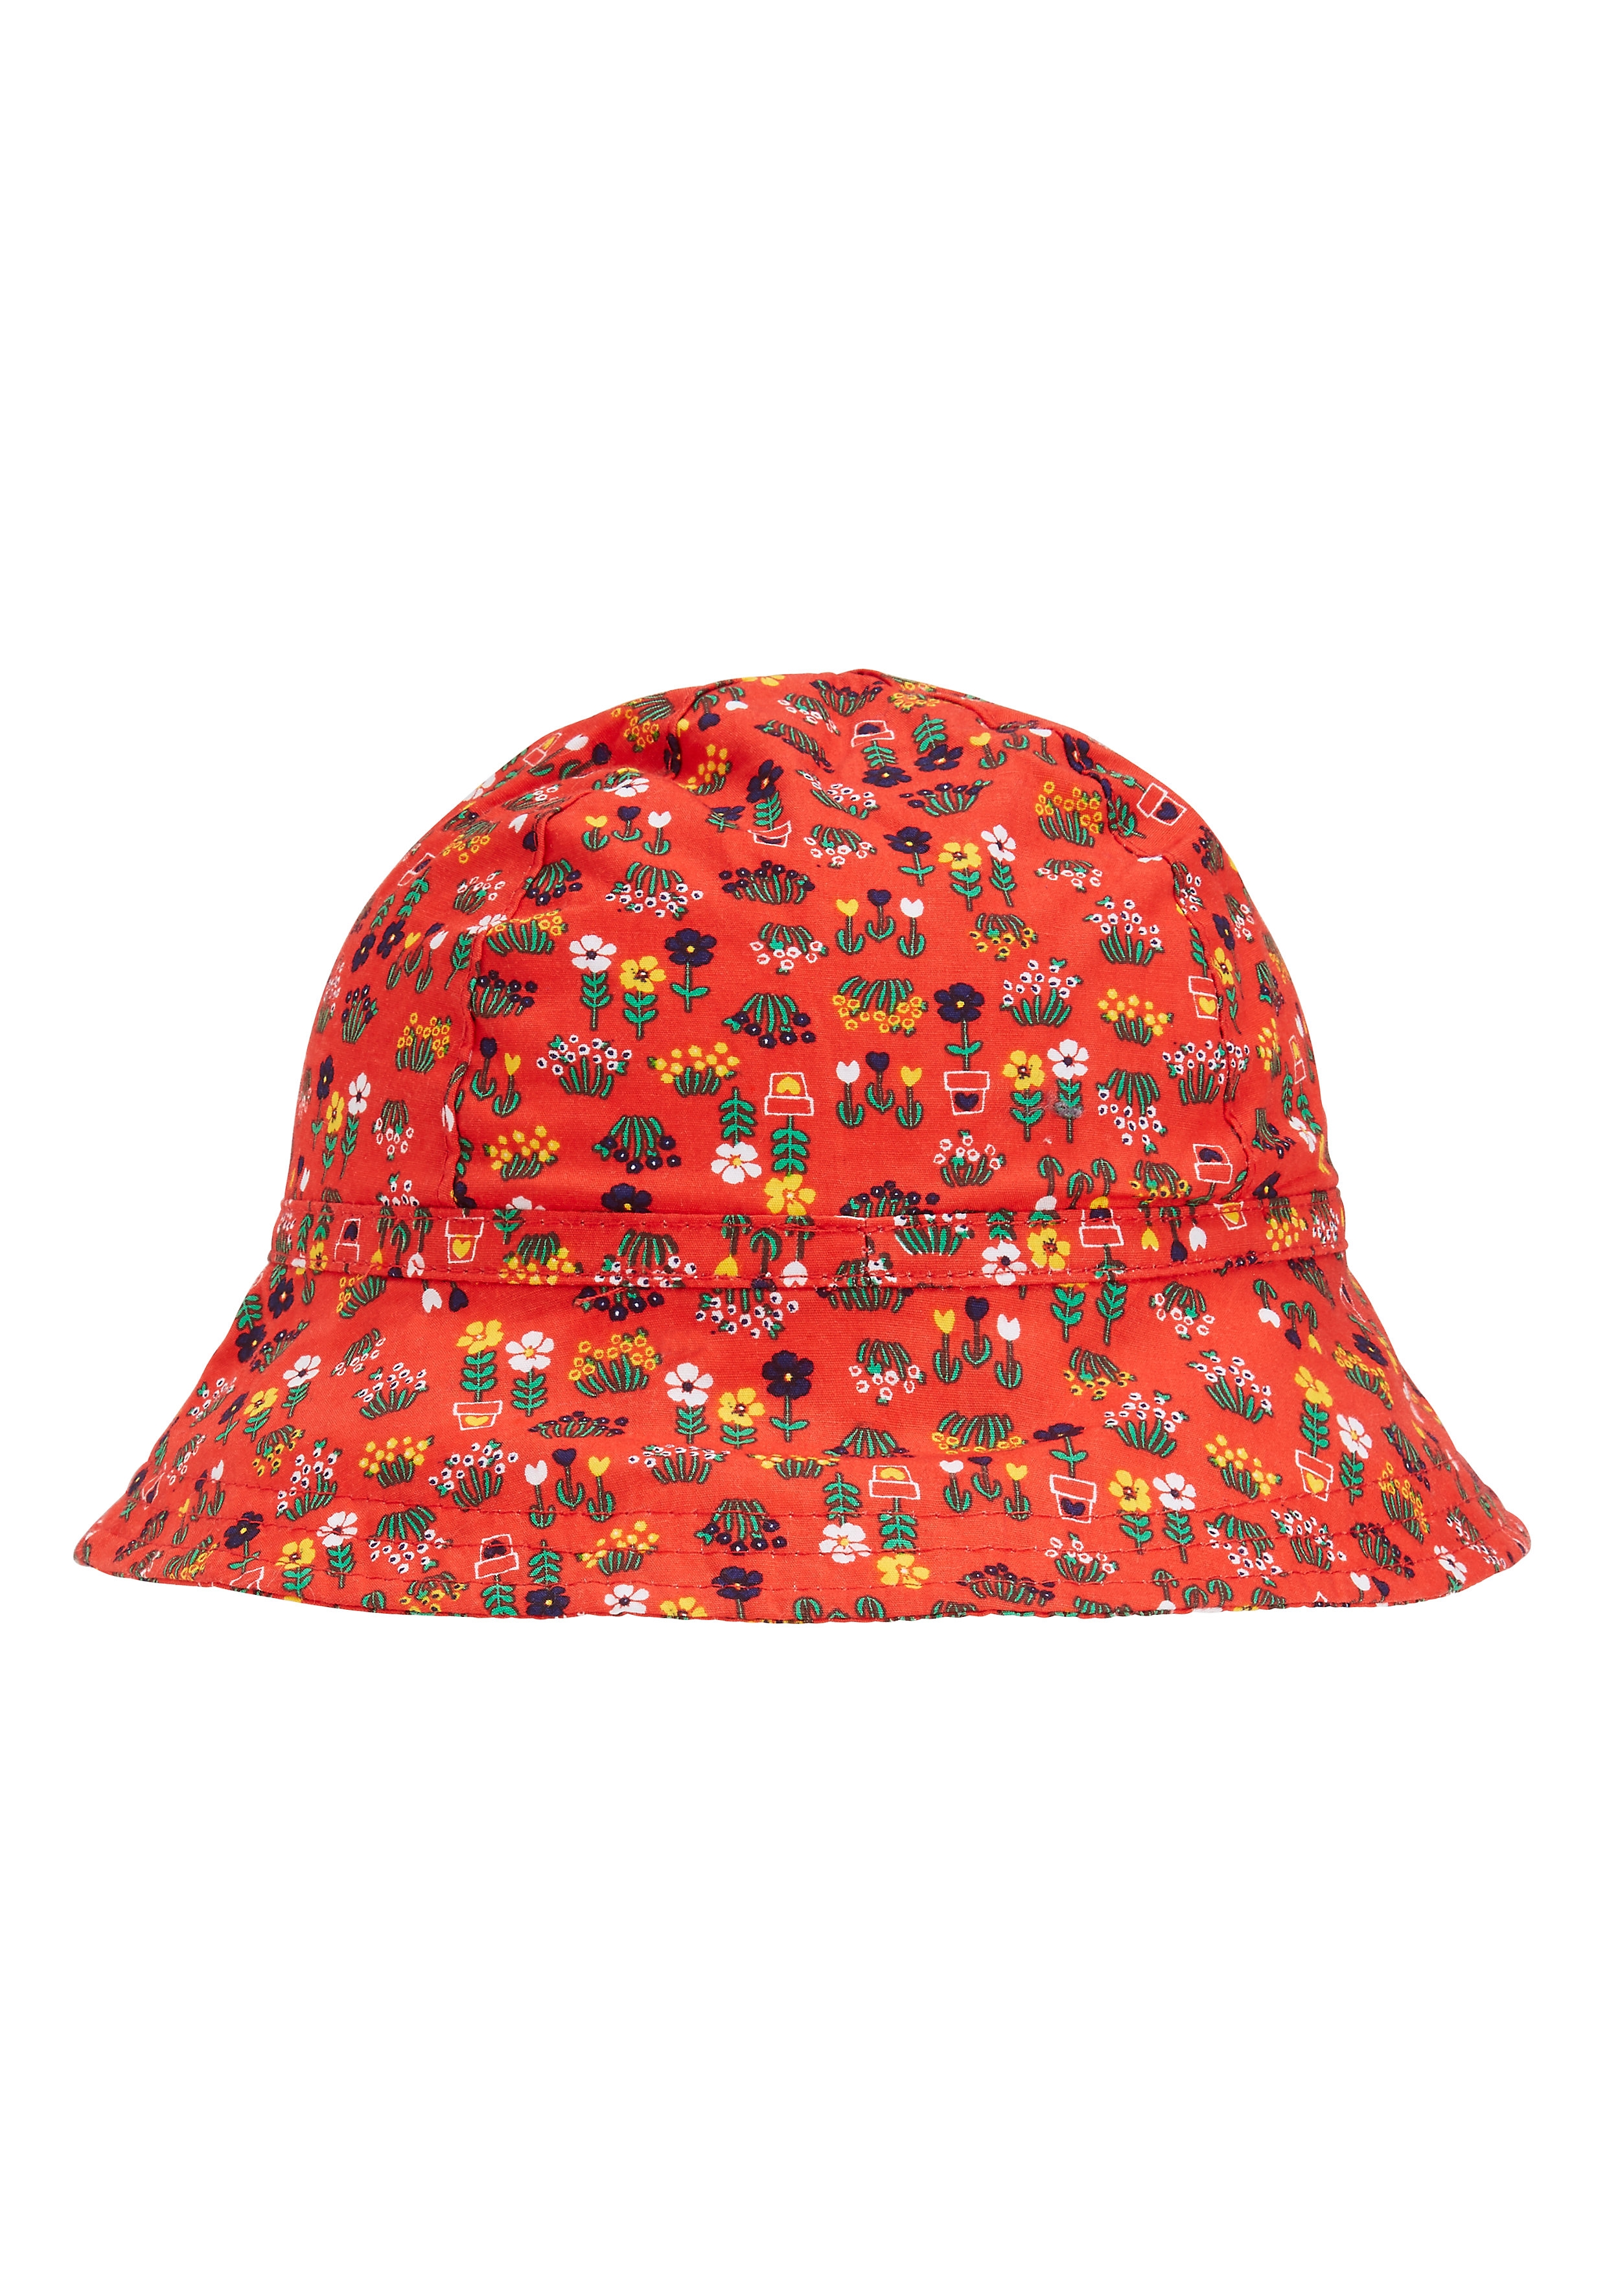 Girls Floral Sunhat - Red